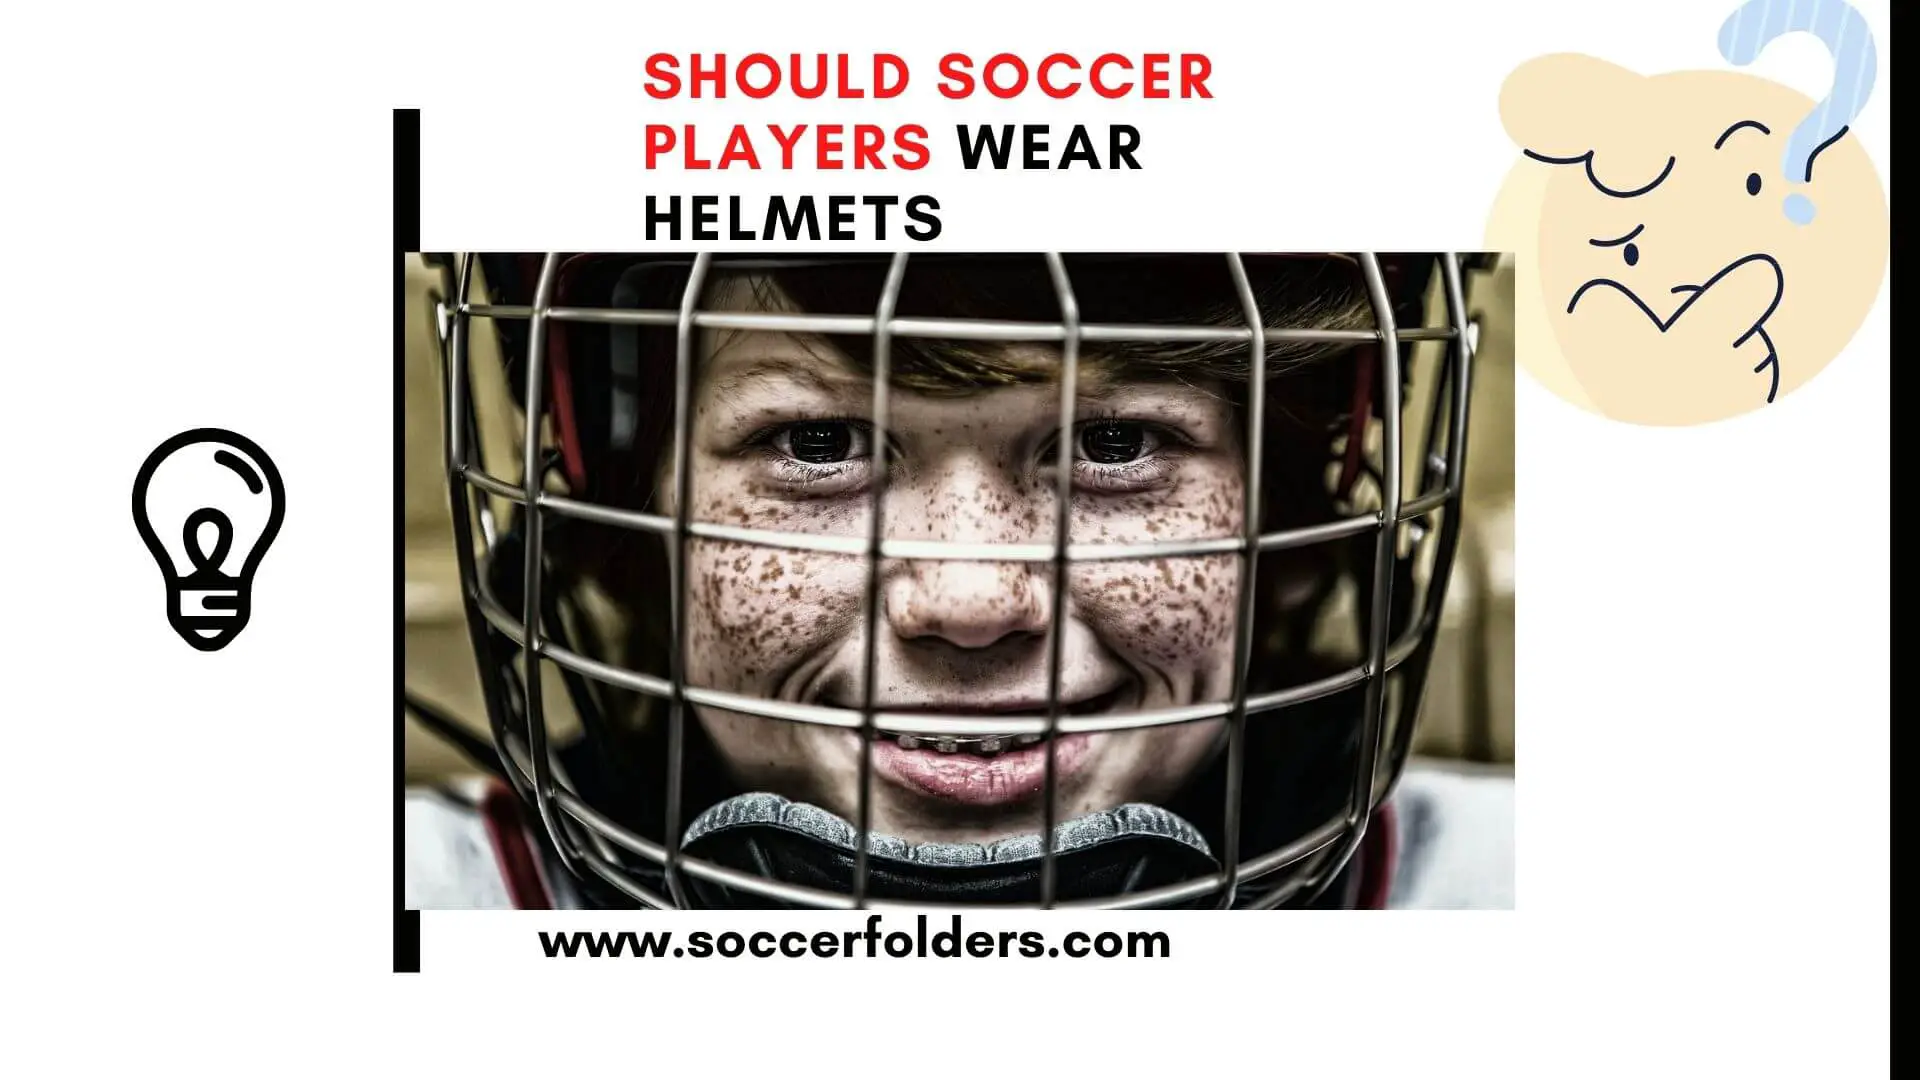 Should soccer players wear helmets - Featured Image